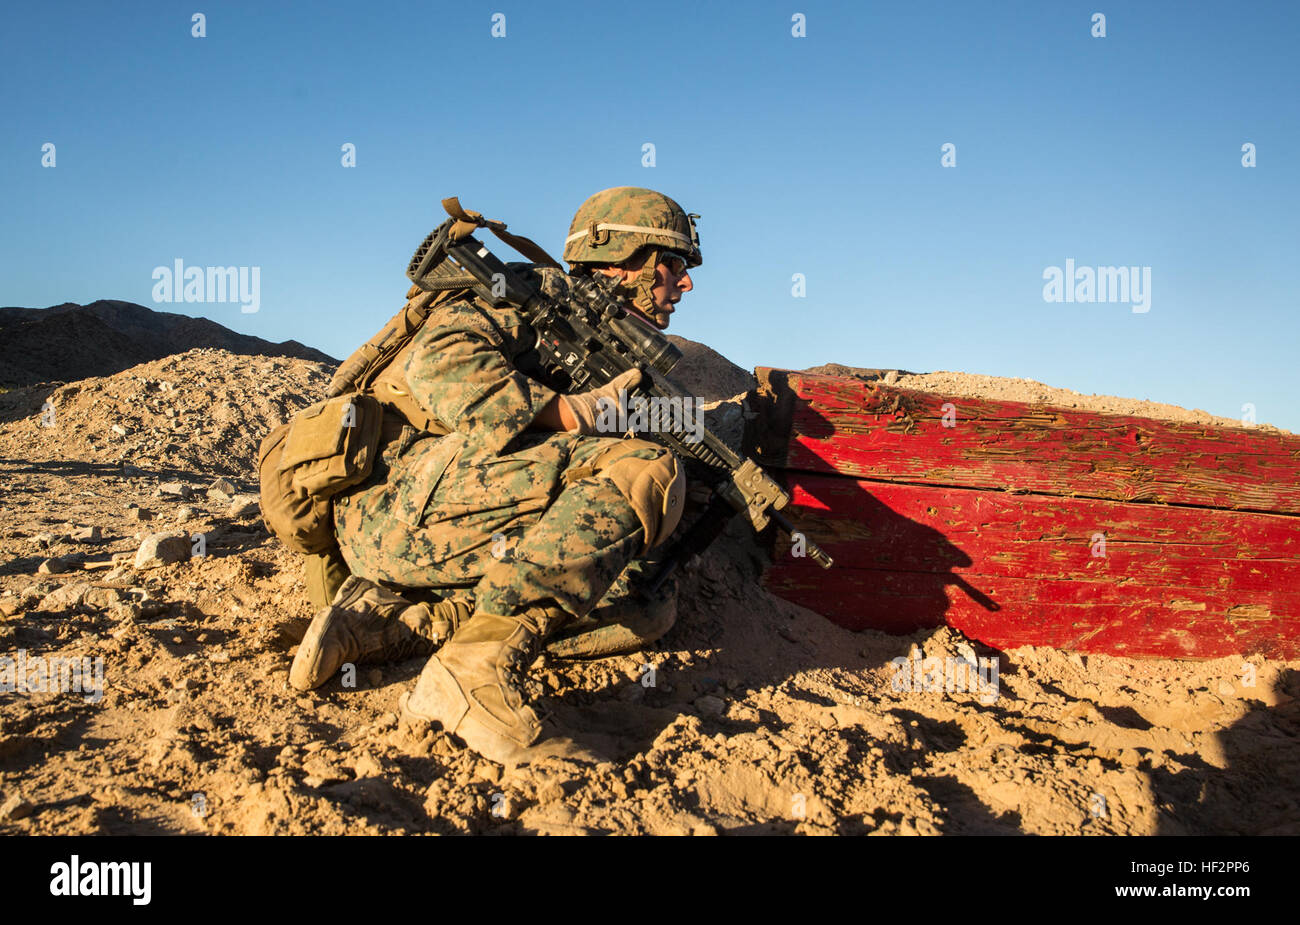 U.S. Marine Lance Cpl. Joseph Burke prepares to engage targets during a combined arms training aboard Marine Corps Air Ground Combat Center, Twentynine Palms, Calif., Dec. 13, 2014. Burke is a team leader with Battalion Landing Team 3rd Battalion, 1st Marine Regiment, 15th Marine Expeditionary Unit. BLT 3/1 conducted this training concurrent with the 15th MEU’s realistic urban training.  RUT prepares the 15th MEU’s Marines for their upcoming deployment, enhancing their combat skills in environments similar to those they may find in future missions. (U.S. Marine Corps Photo by Sgt. Emmanuel Ram Stock Photo